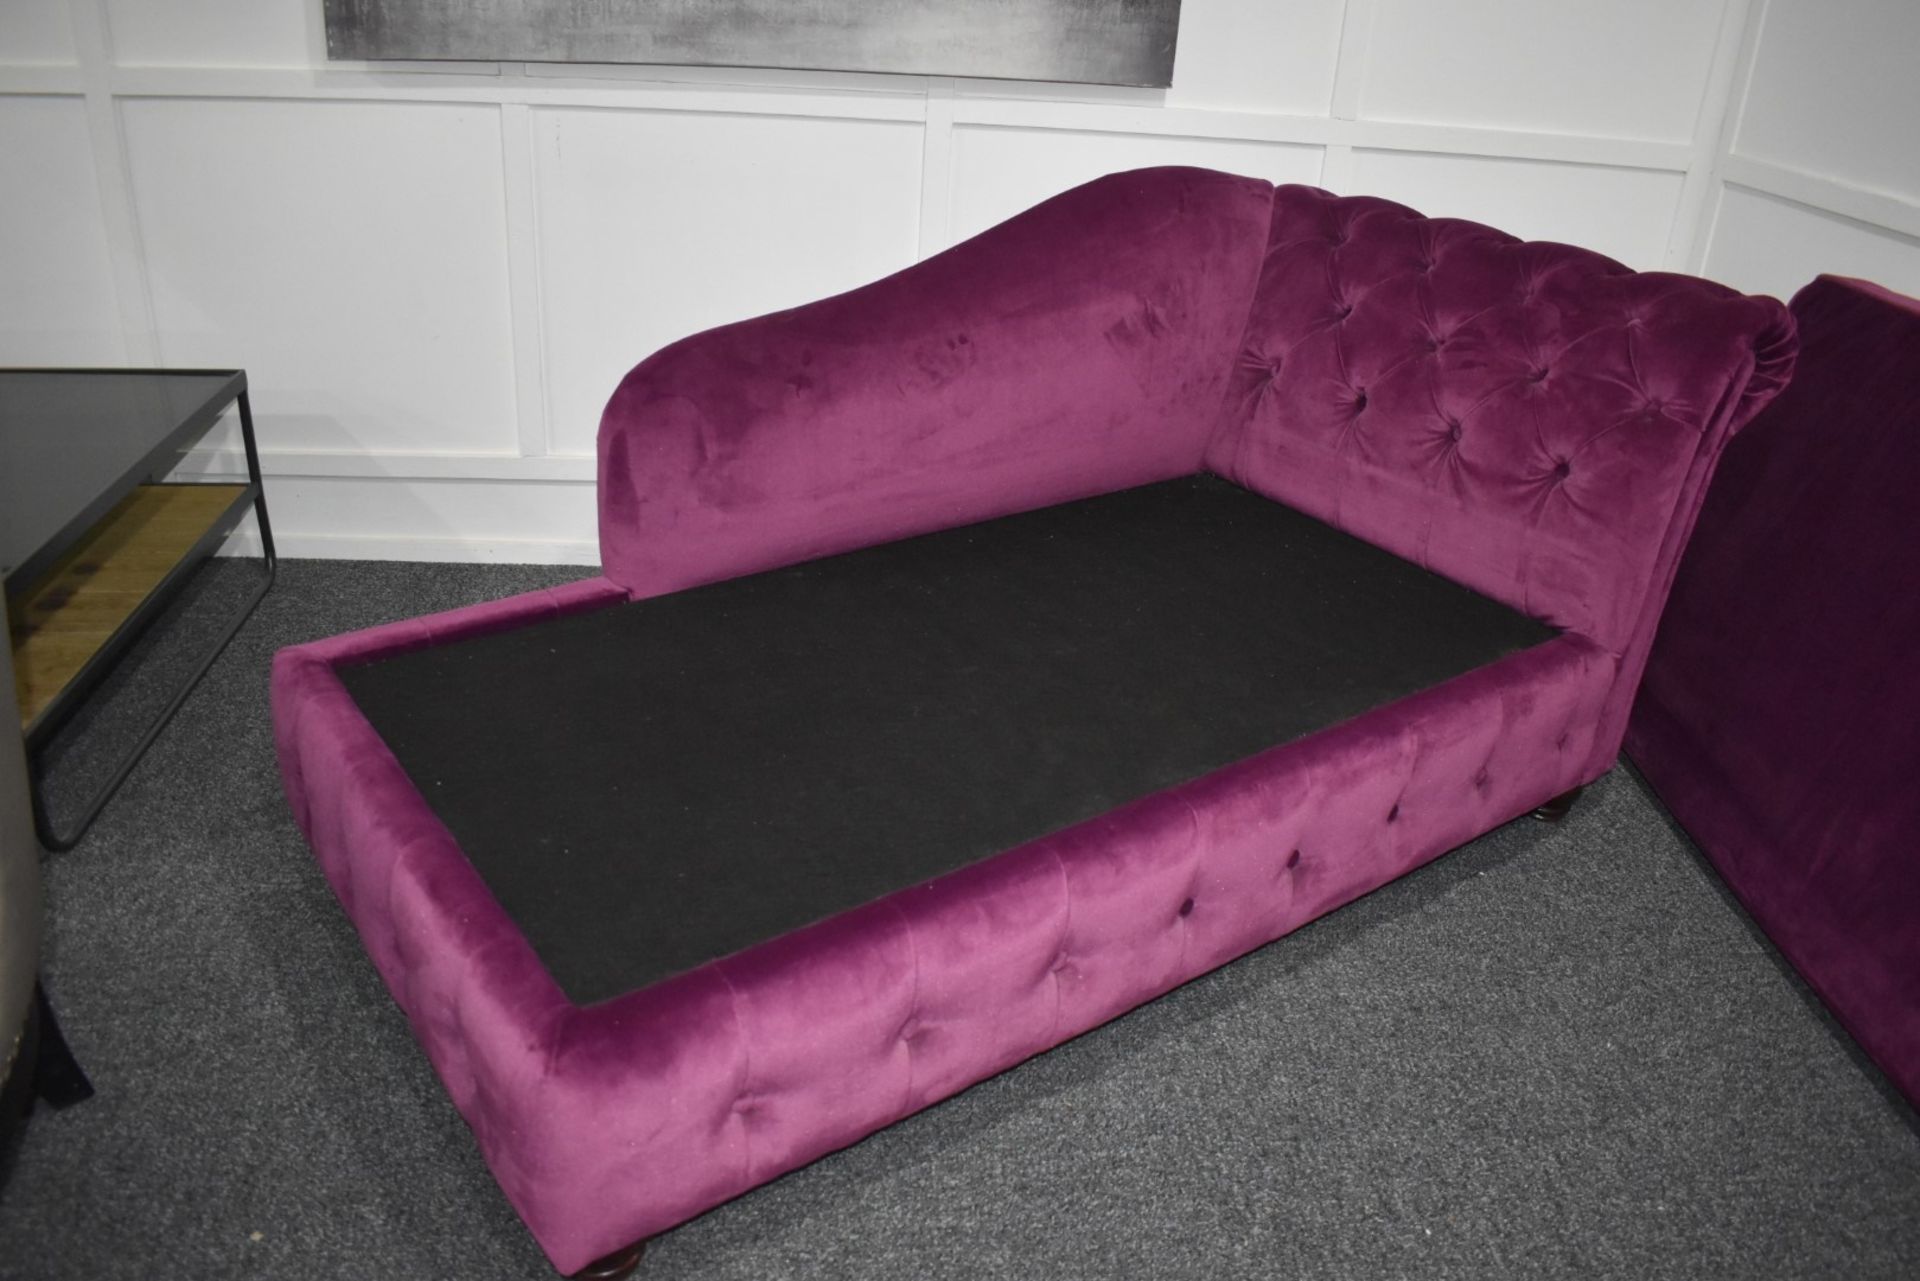 1 x Elegant Chesterfield-style Button-back Chaise Lounge, Richly Upholstered in a Mulberry - Image 8 of 10